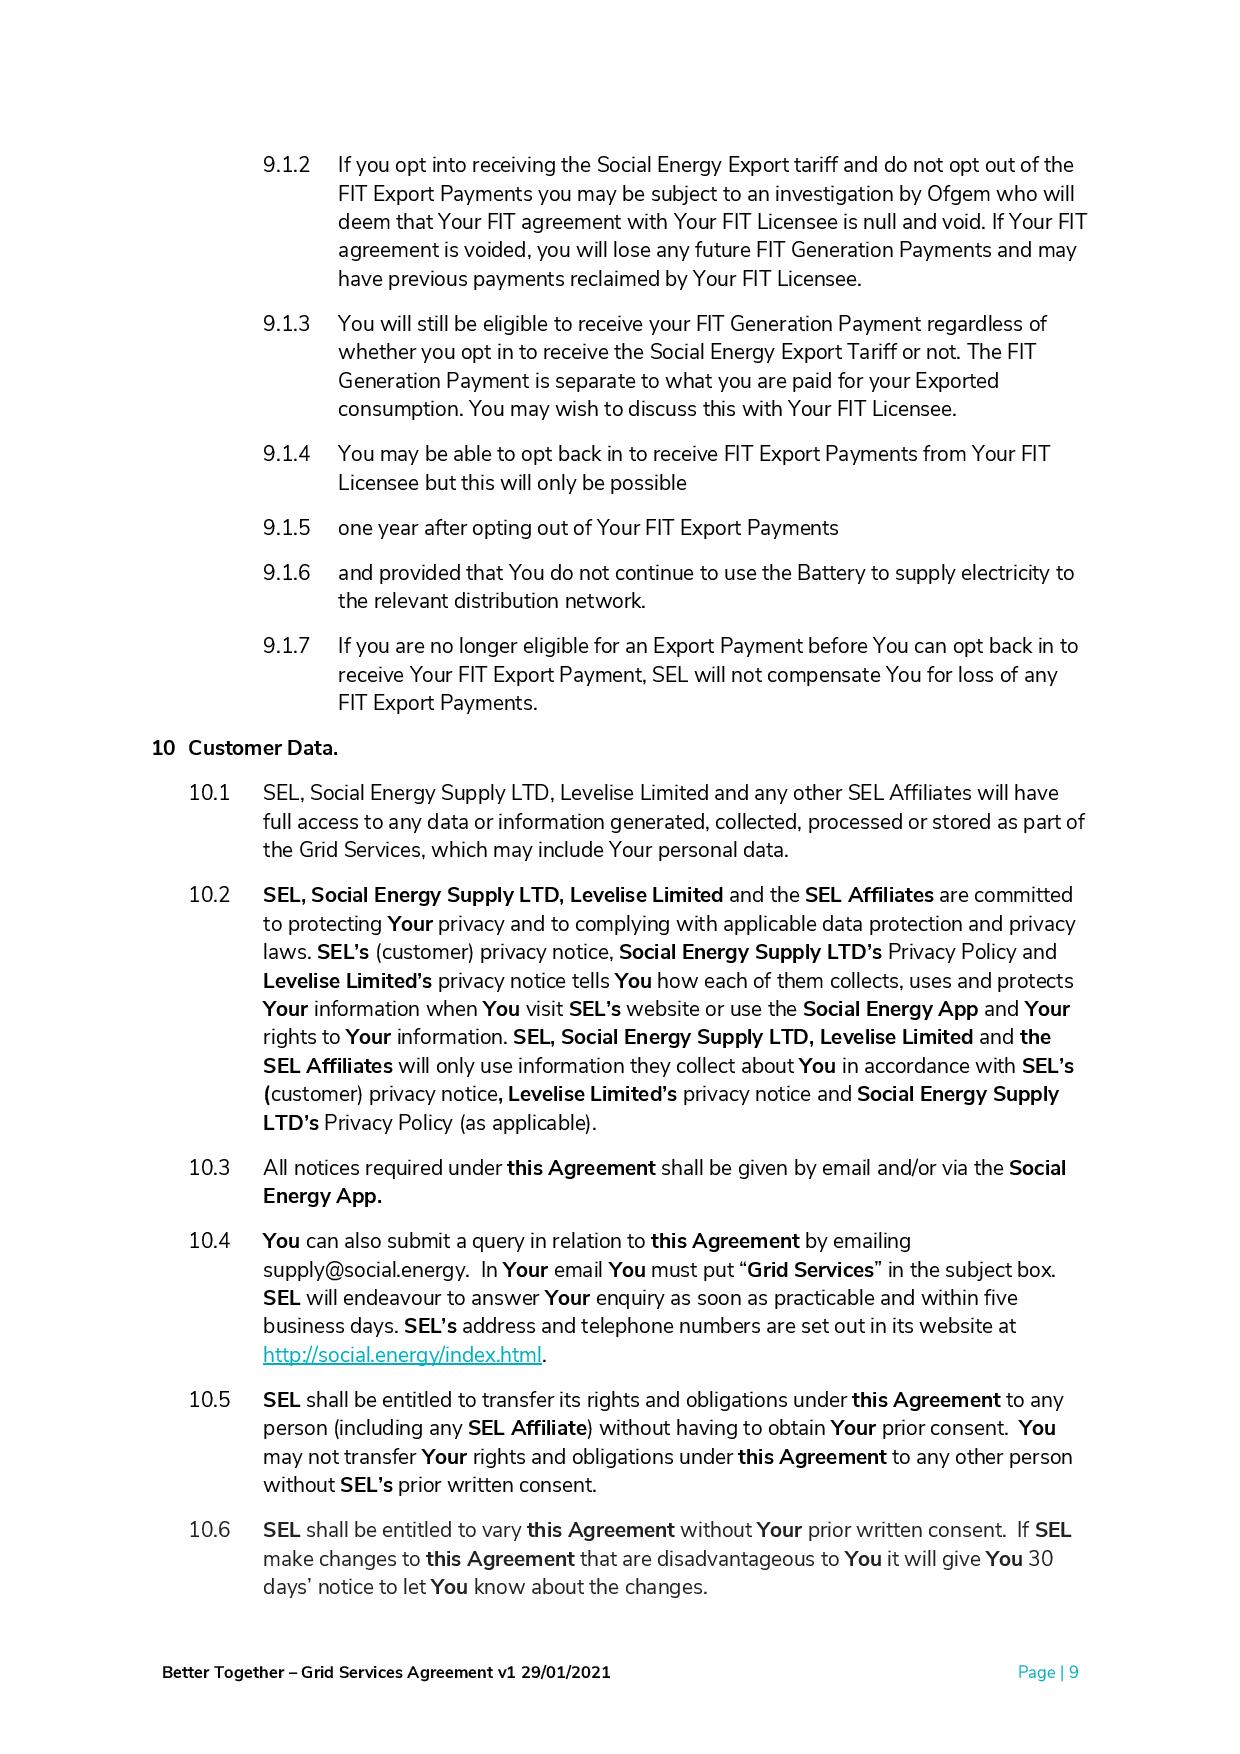 Better_Together_-_Grid_Services_Agreement-page-010.jpg